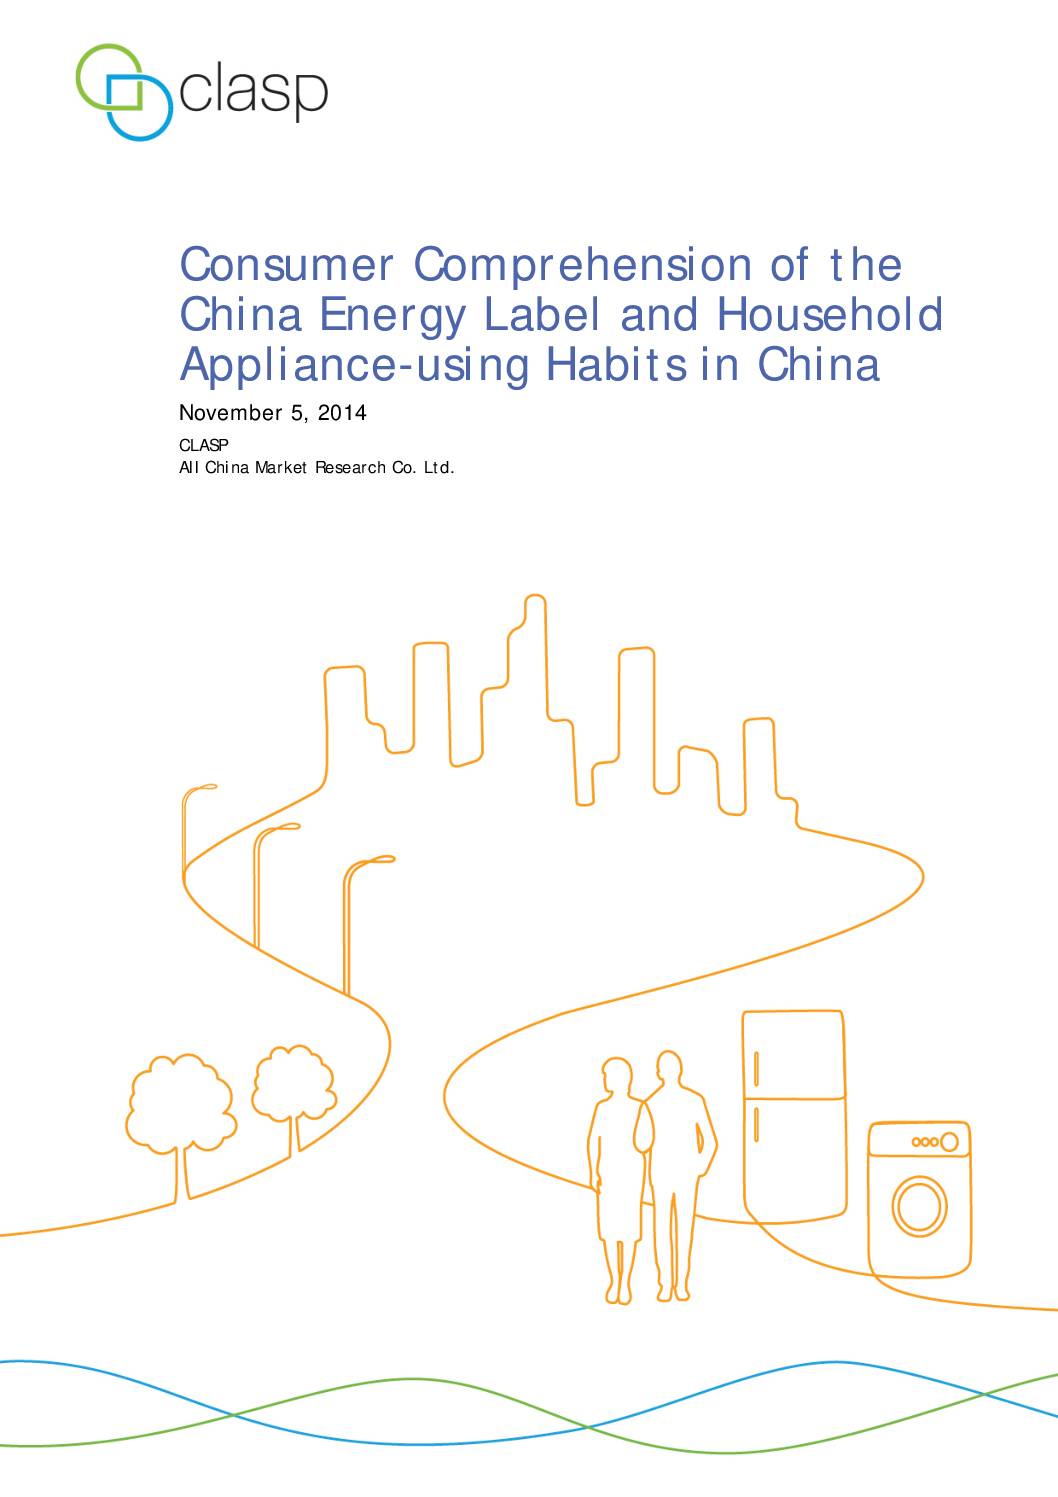 Consumer Comprehension of the China Energy Label and Household Appliance-using Habits in China